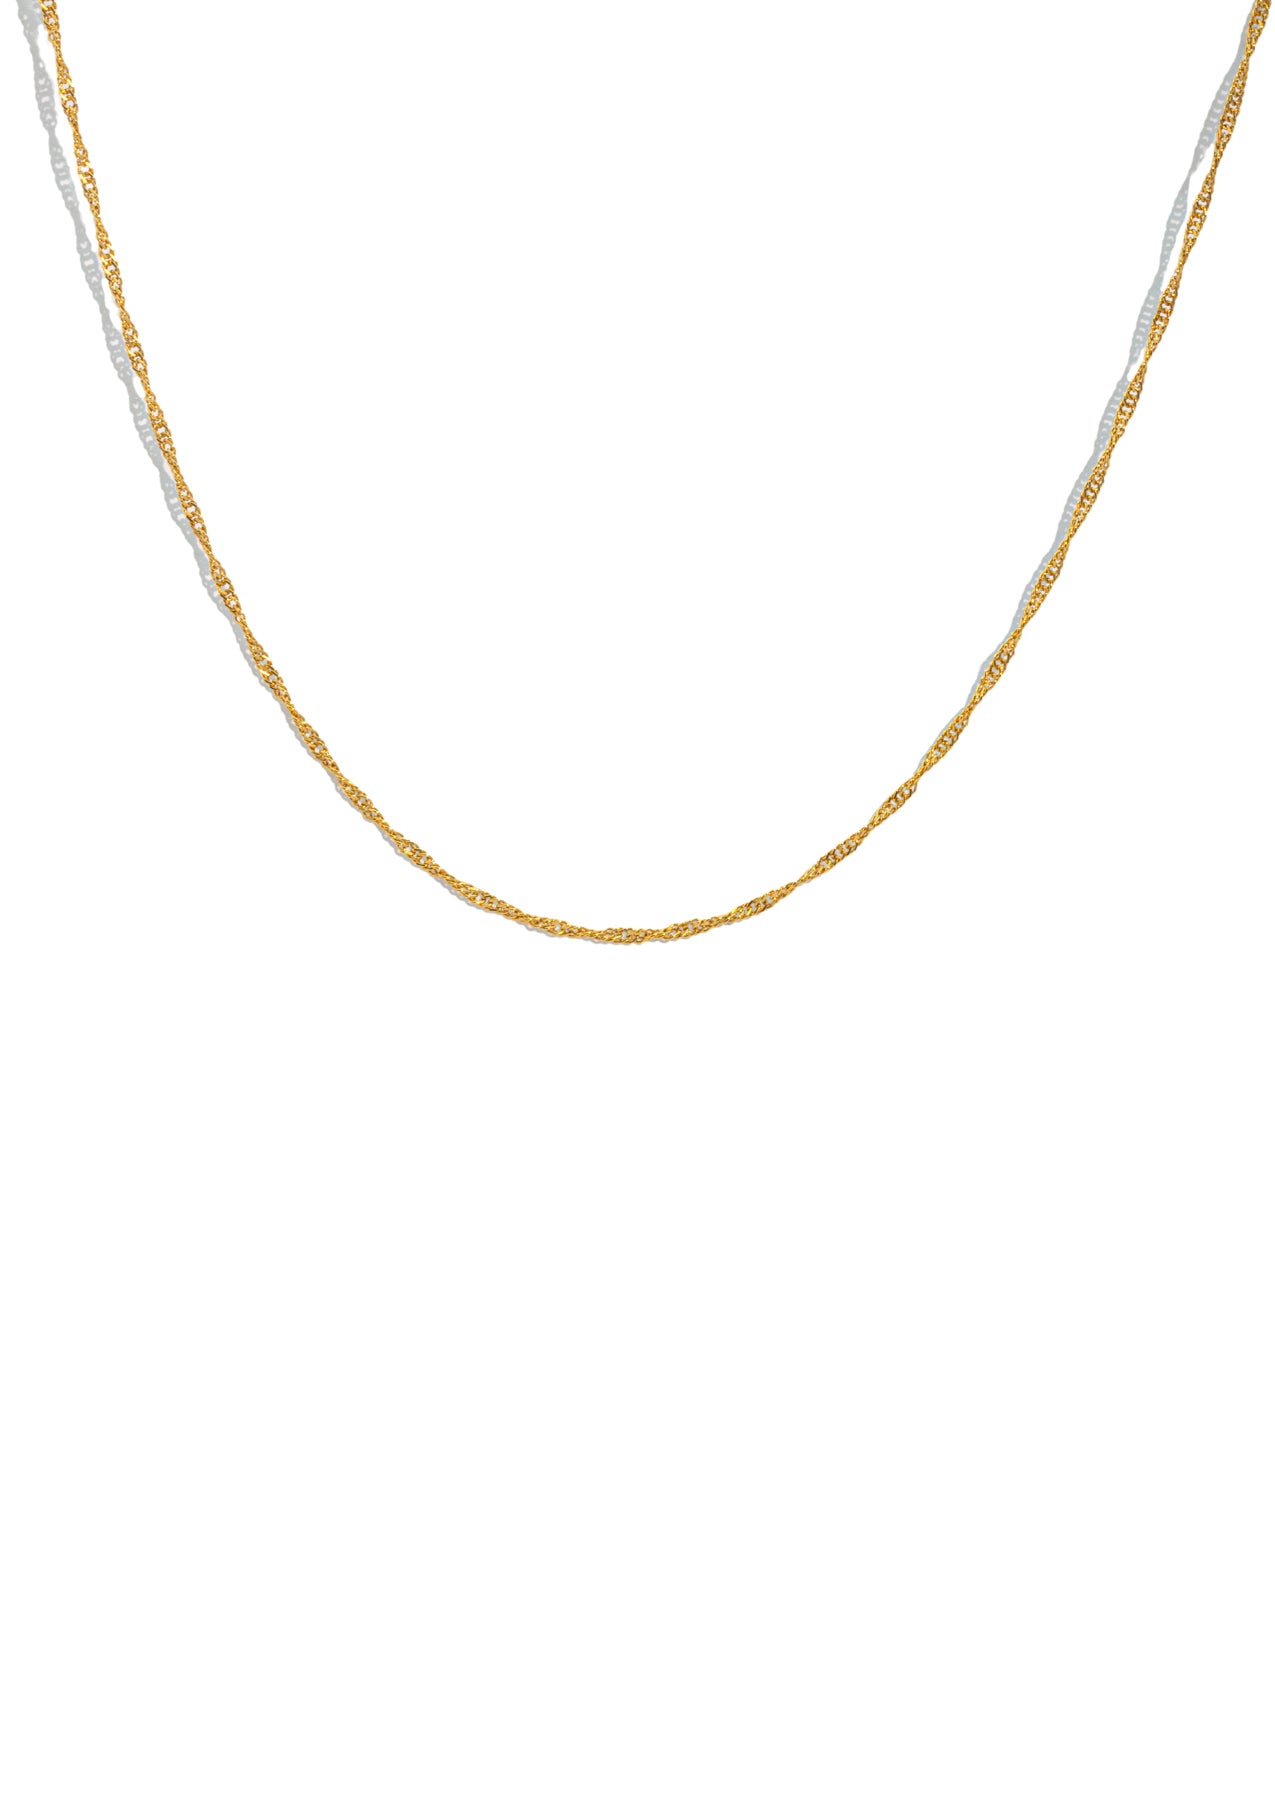 The Poetry 14ct Gold Filled Chain Necklace